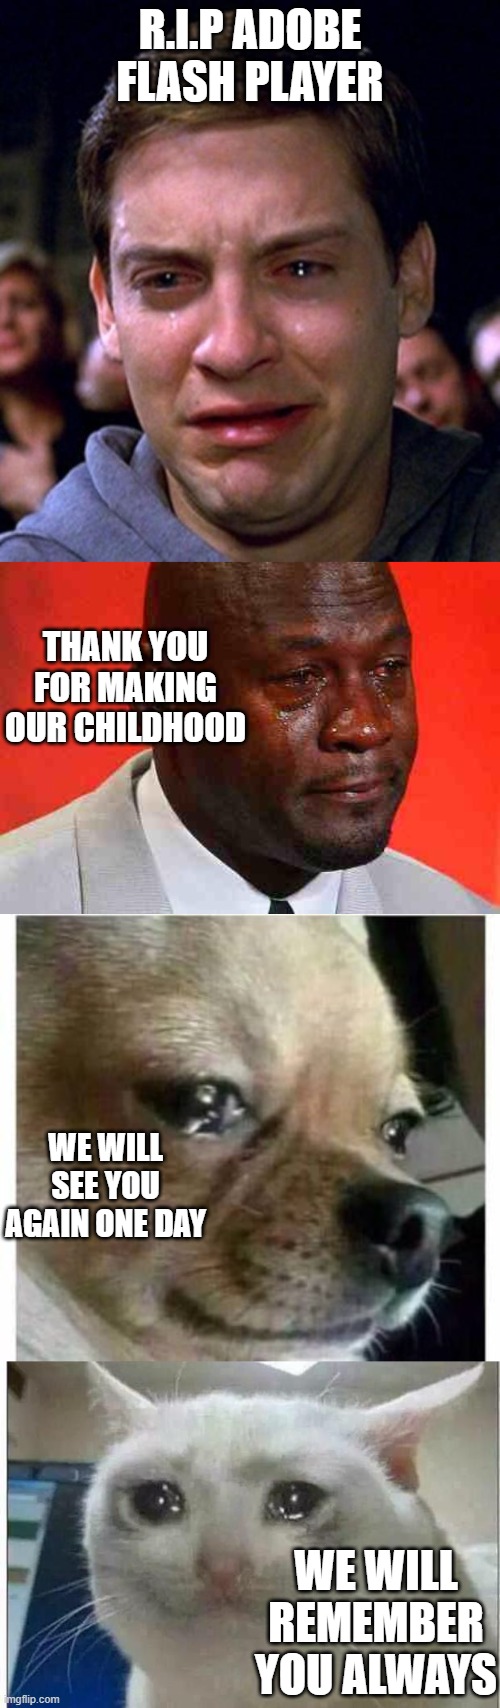 R.I.P Adobe Flash Player | R.I.P ADOBE FLASH PLAYER; THANK YOU FOR MAKING OUR CHILDHOOD; WE WILL SEE YOU AGAIN ONE DAY; WE WILL REMEMBER YOU ALWAYS | image tagged in crying peter parker,crying michael jordan,crying dog,crying cat | made w/ Imgflip meme maker